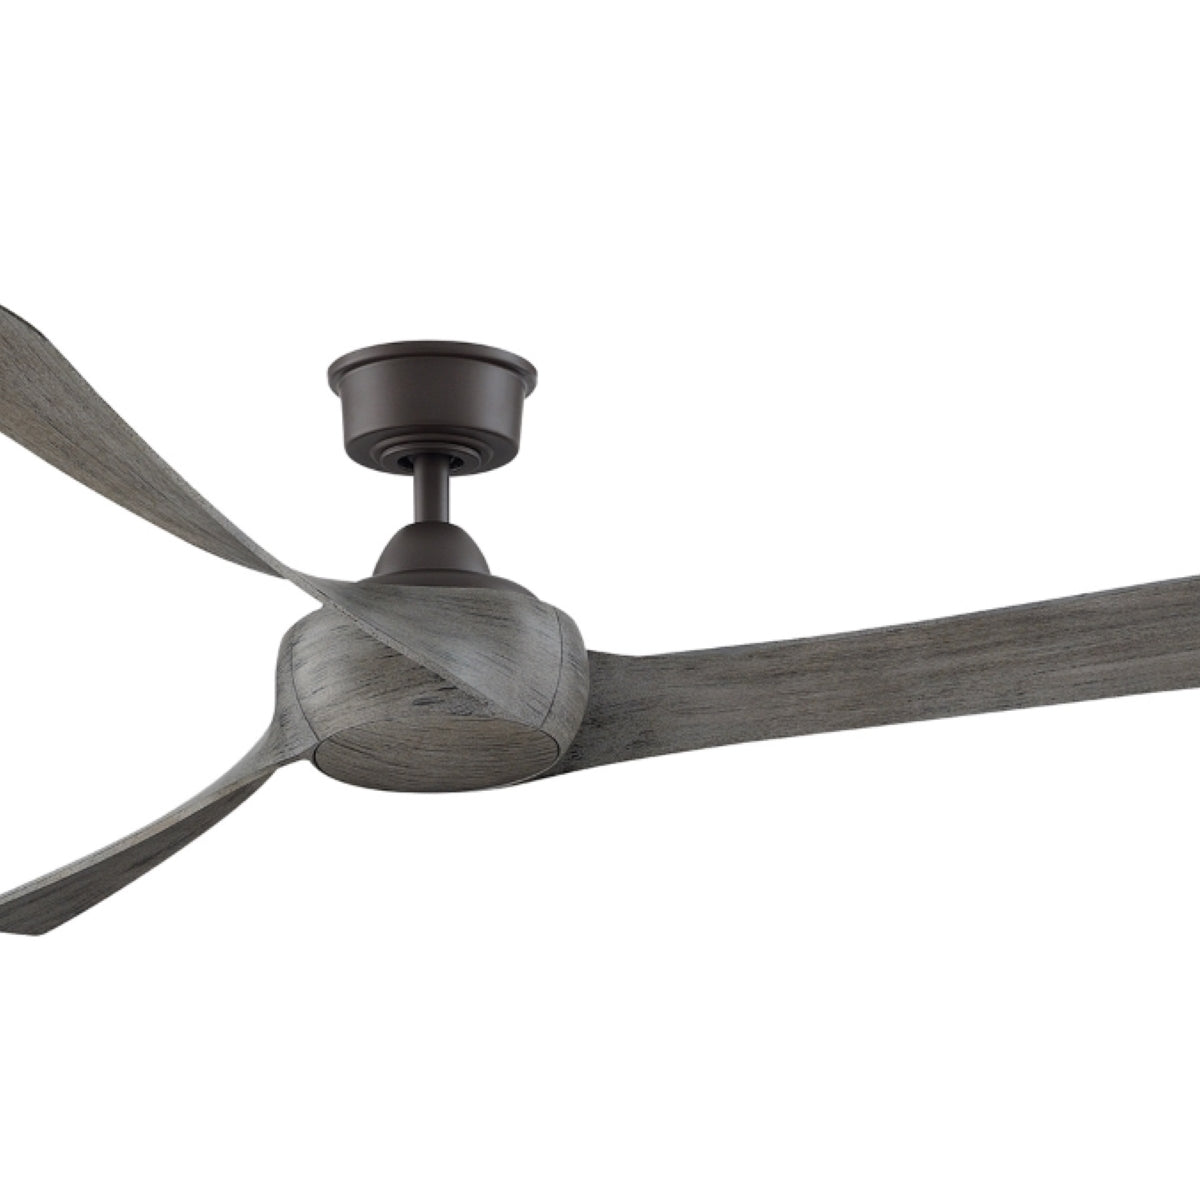 Wrap Custom Indoor/Outdoor Ceiling Fan Motor With Remote, 44-60" Blades Sold Separately - Bees Lighting